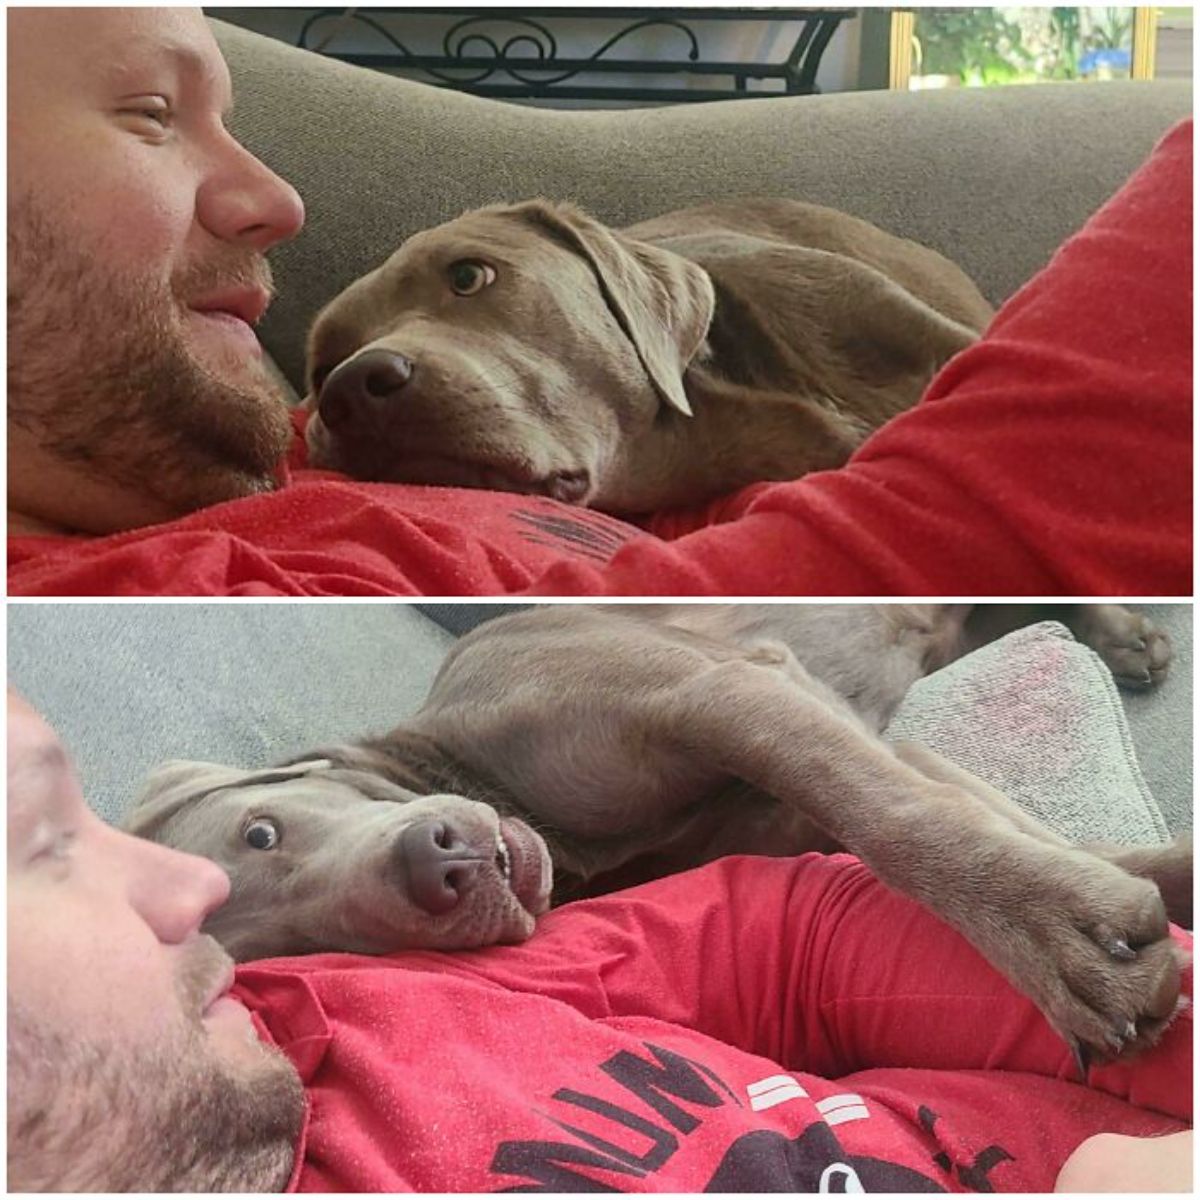 2 photos of a brown dog laying partly on a man and looking at him lovingly